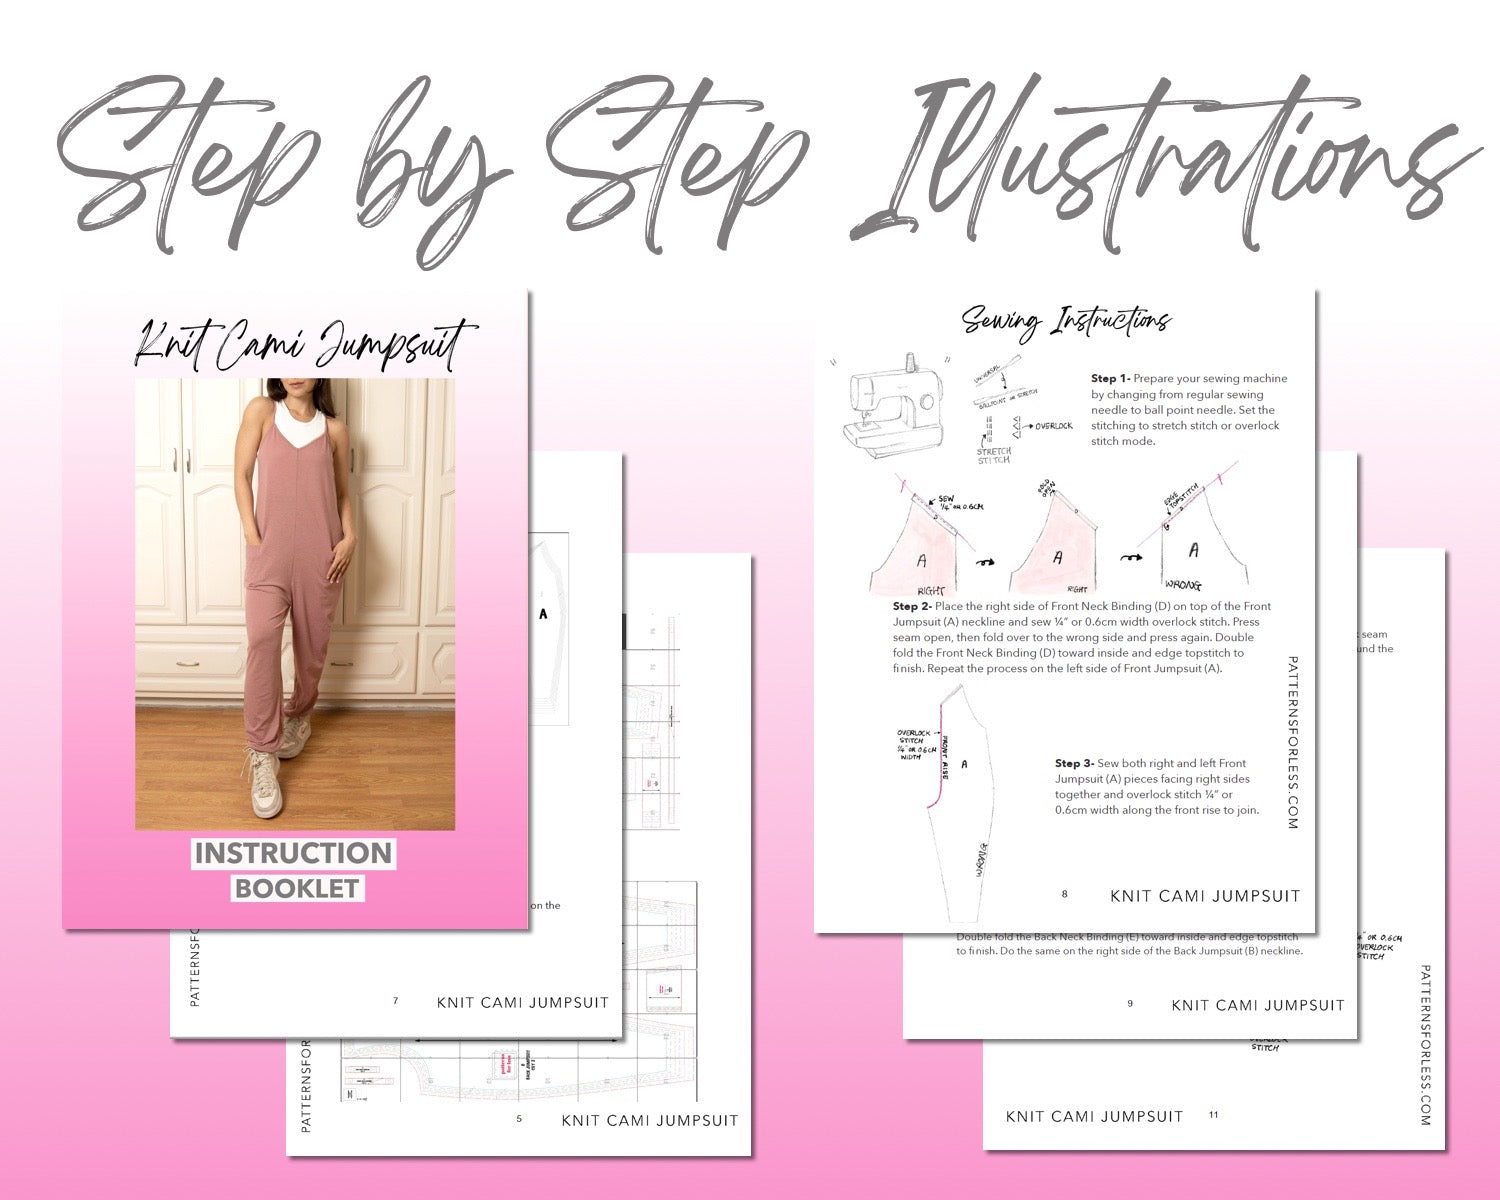 Keyhole Back Cami Knit Jumpsuit sewing pattern step by step illustrations.